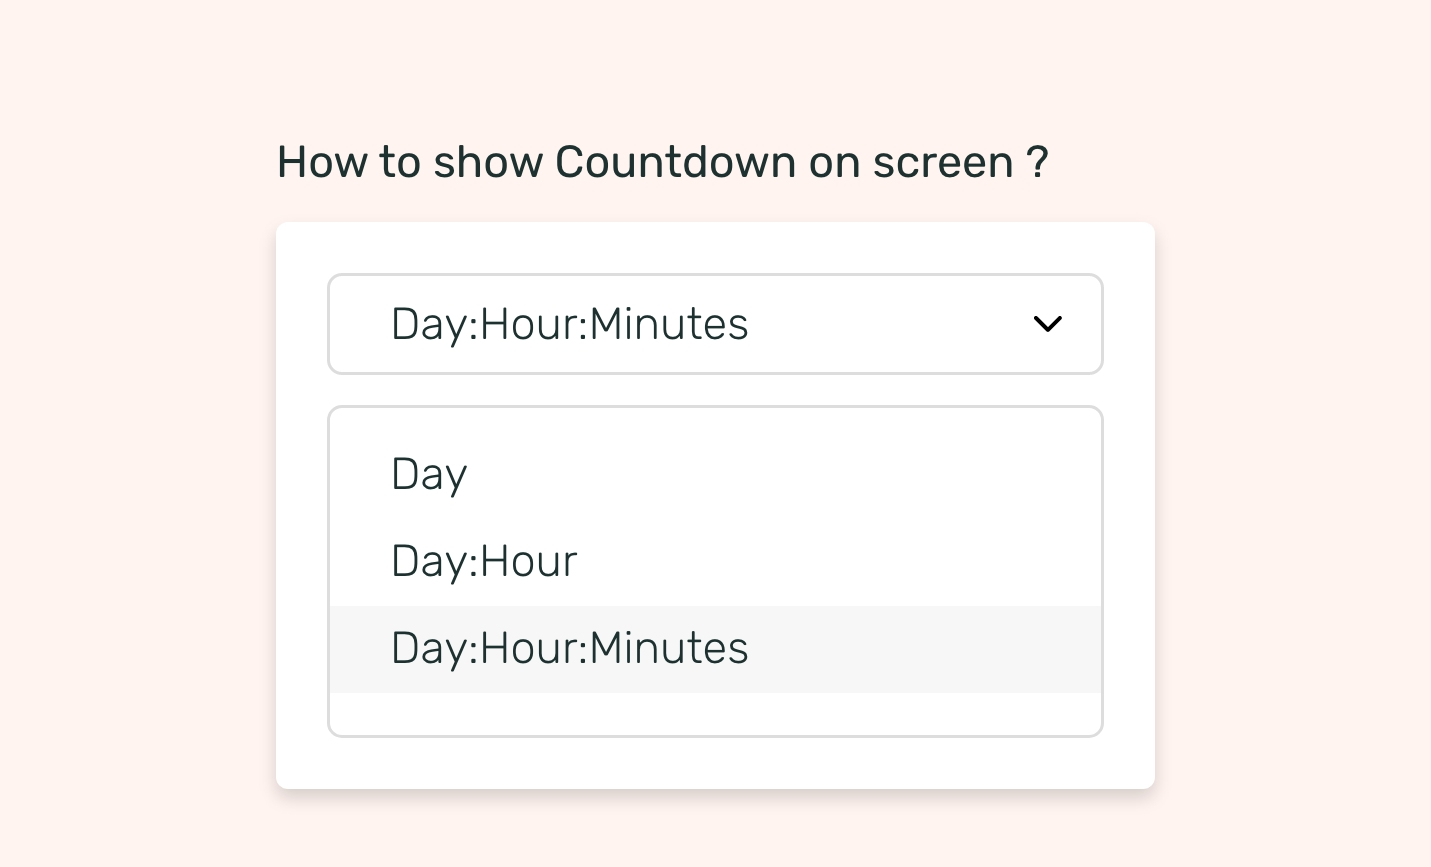 Countdown app interface showing theme options like Day, Day:Hour and Day:Hour:Minutes to display on digital signage screens